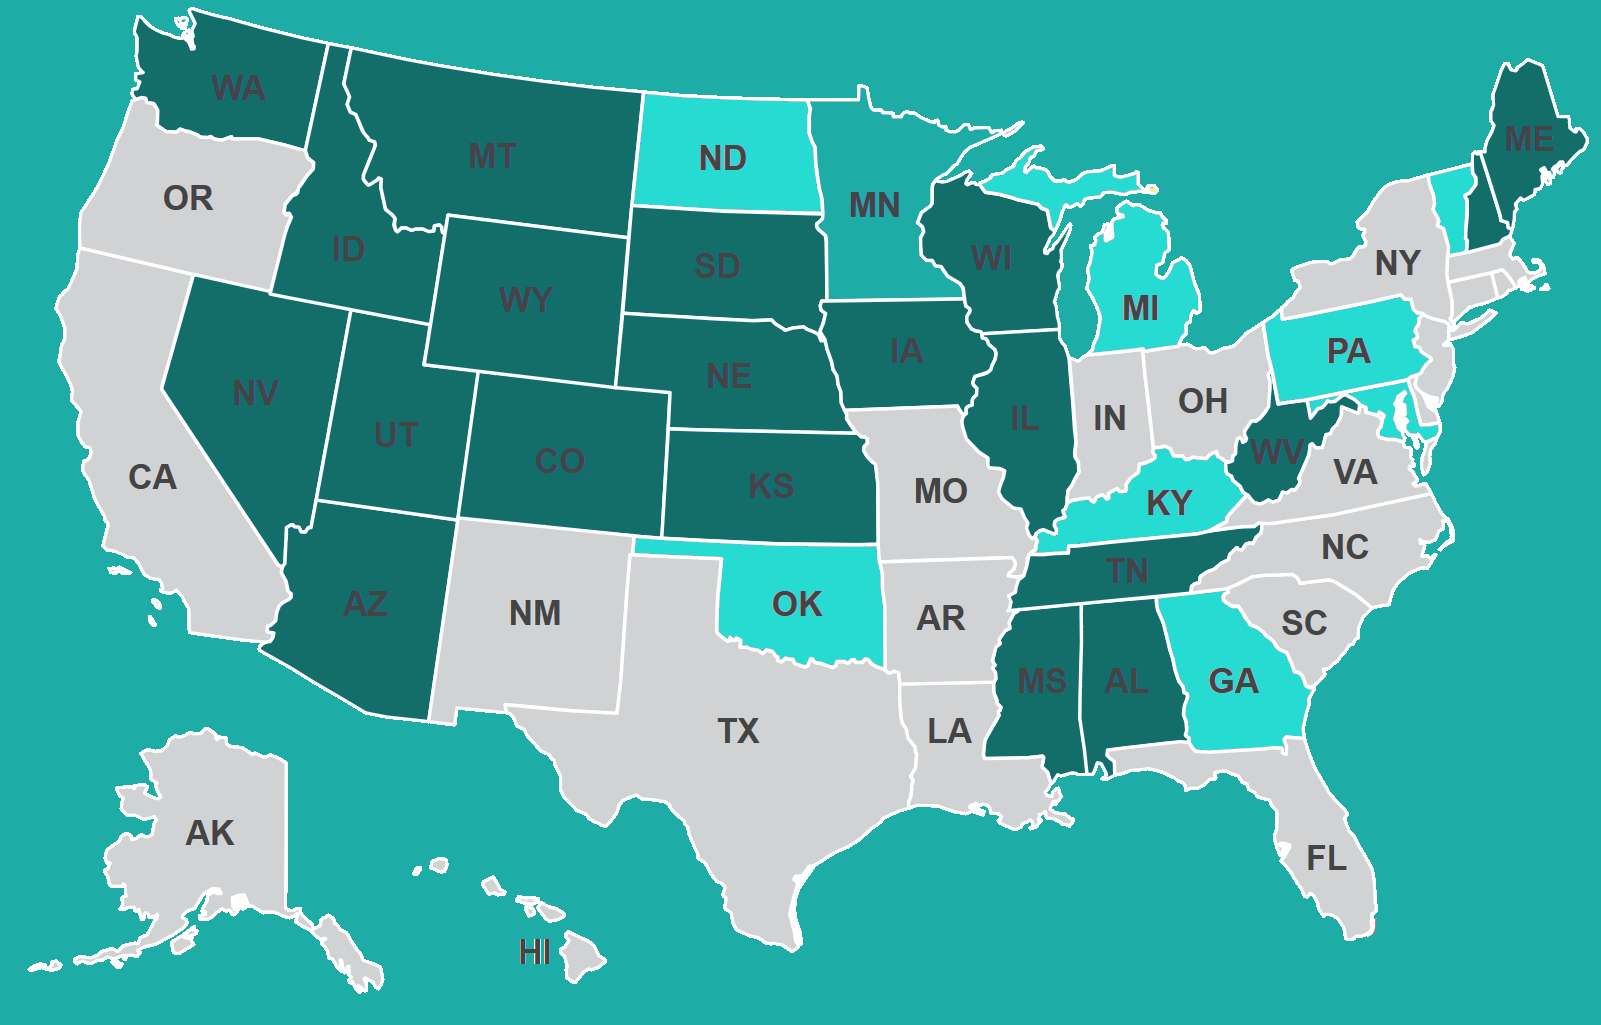 Interstate Medical Licensure Compact Map